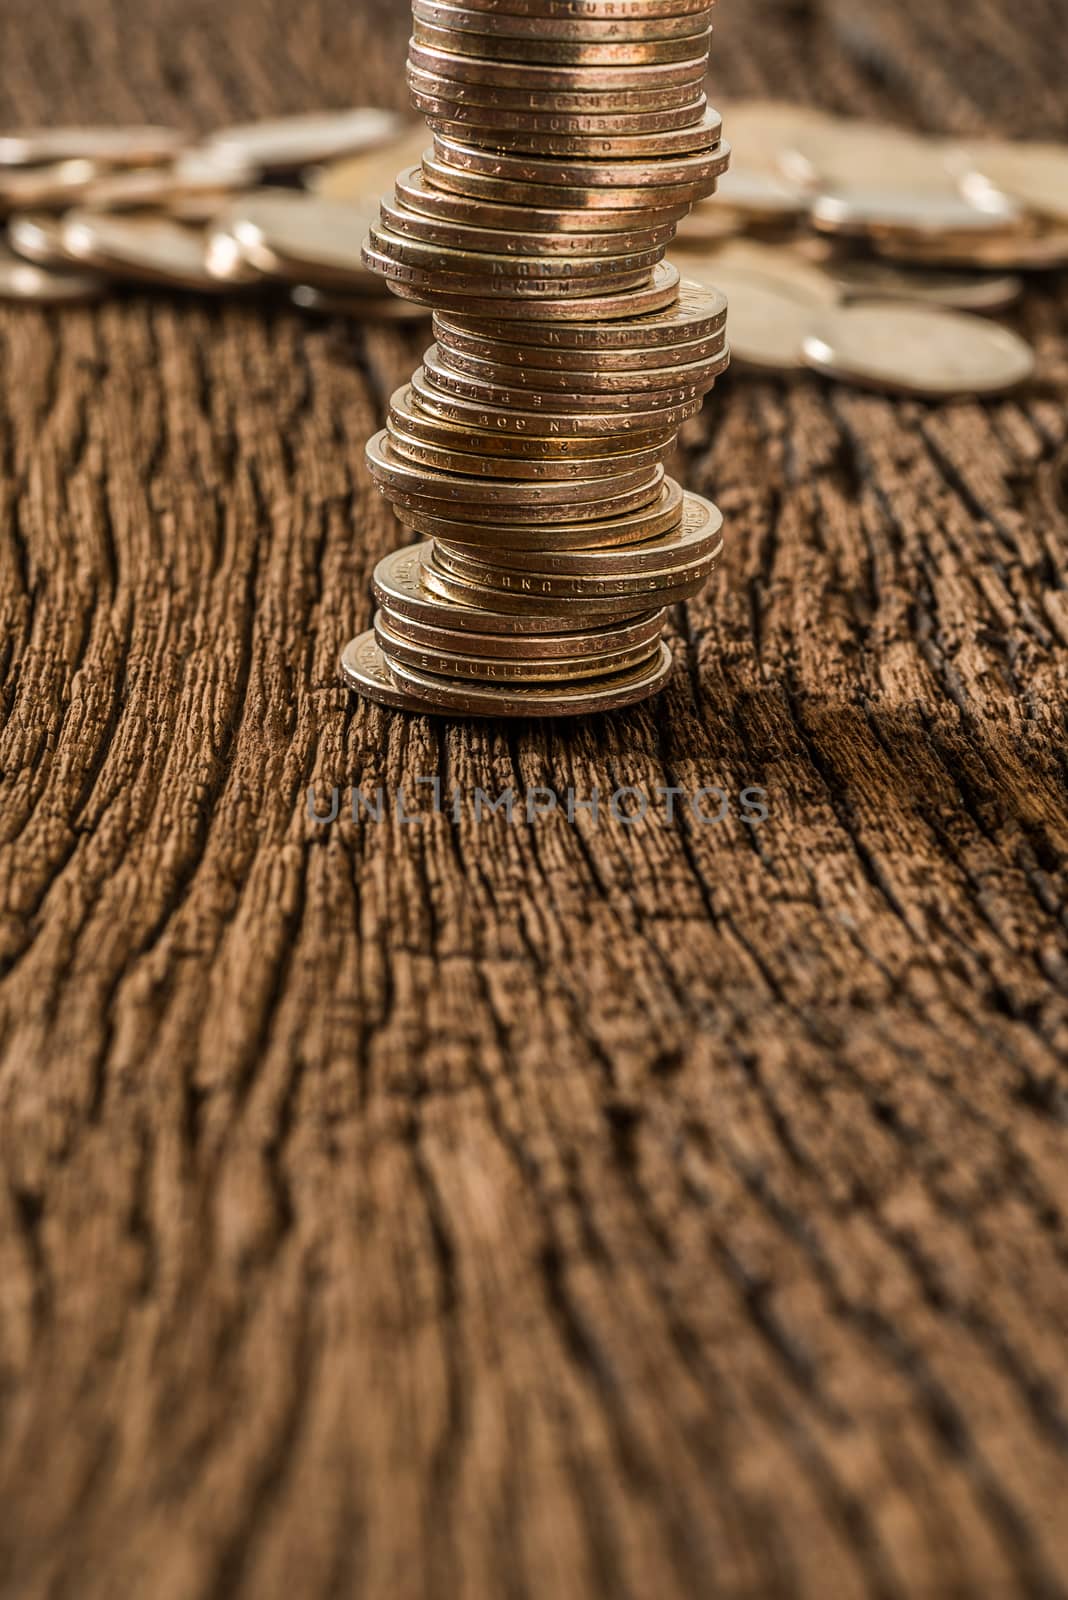 stack of dollars money coin on grunge wooden background